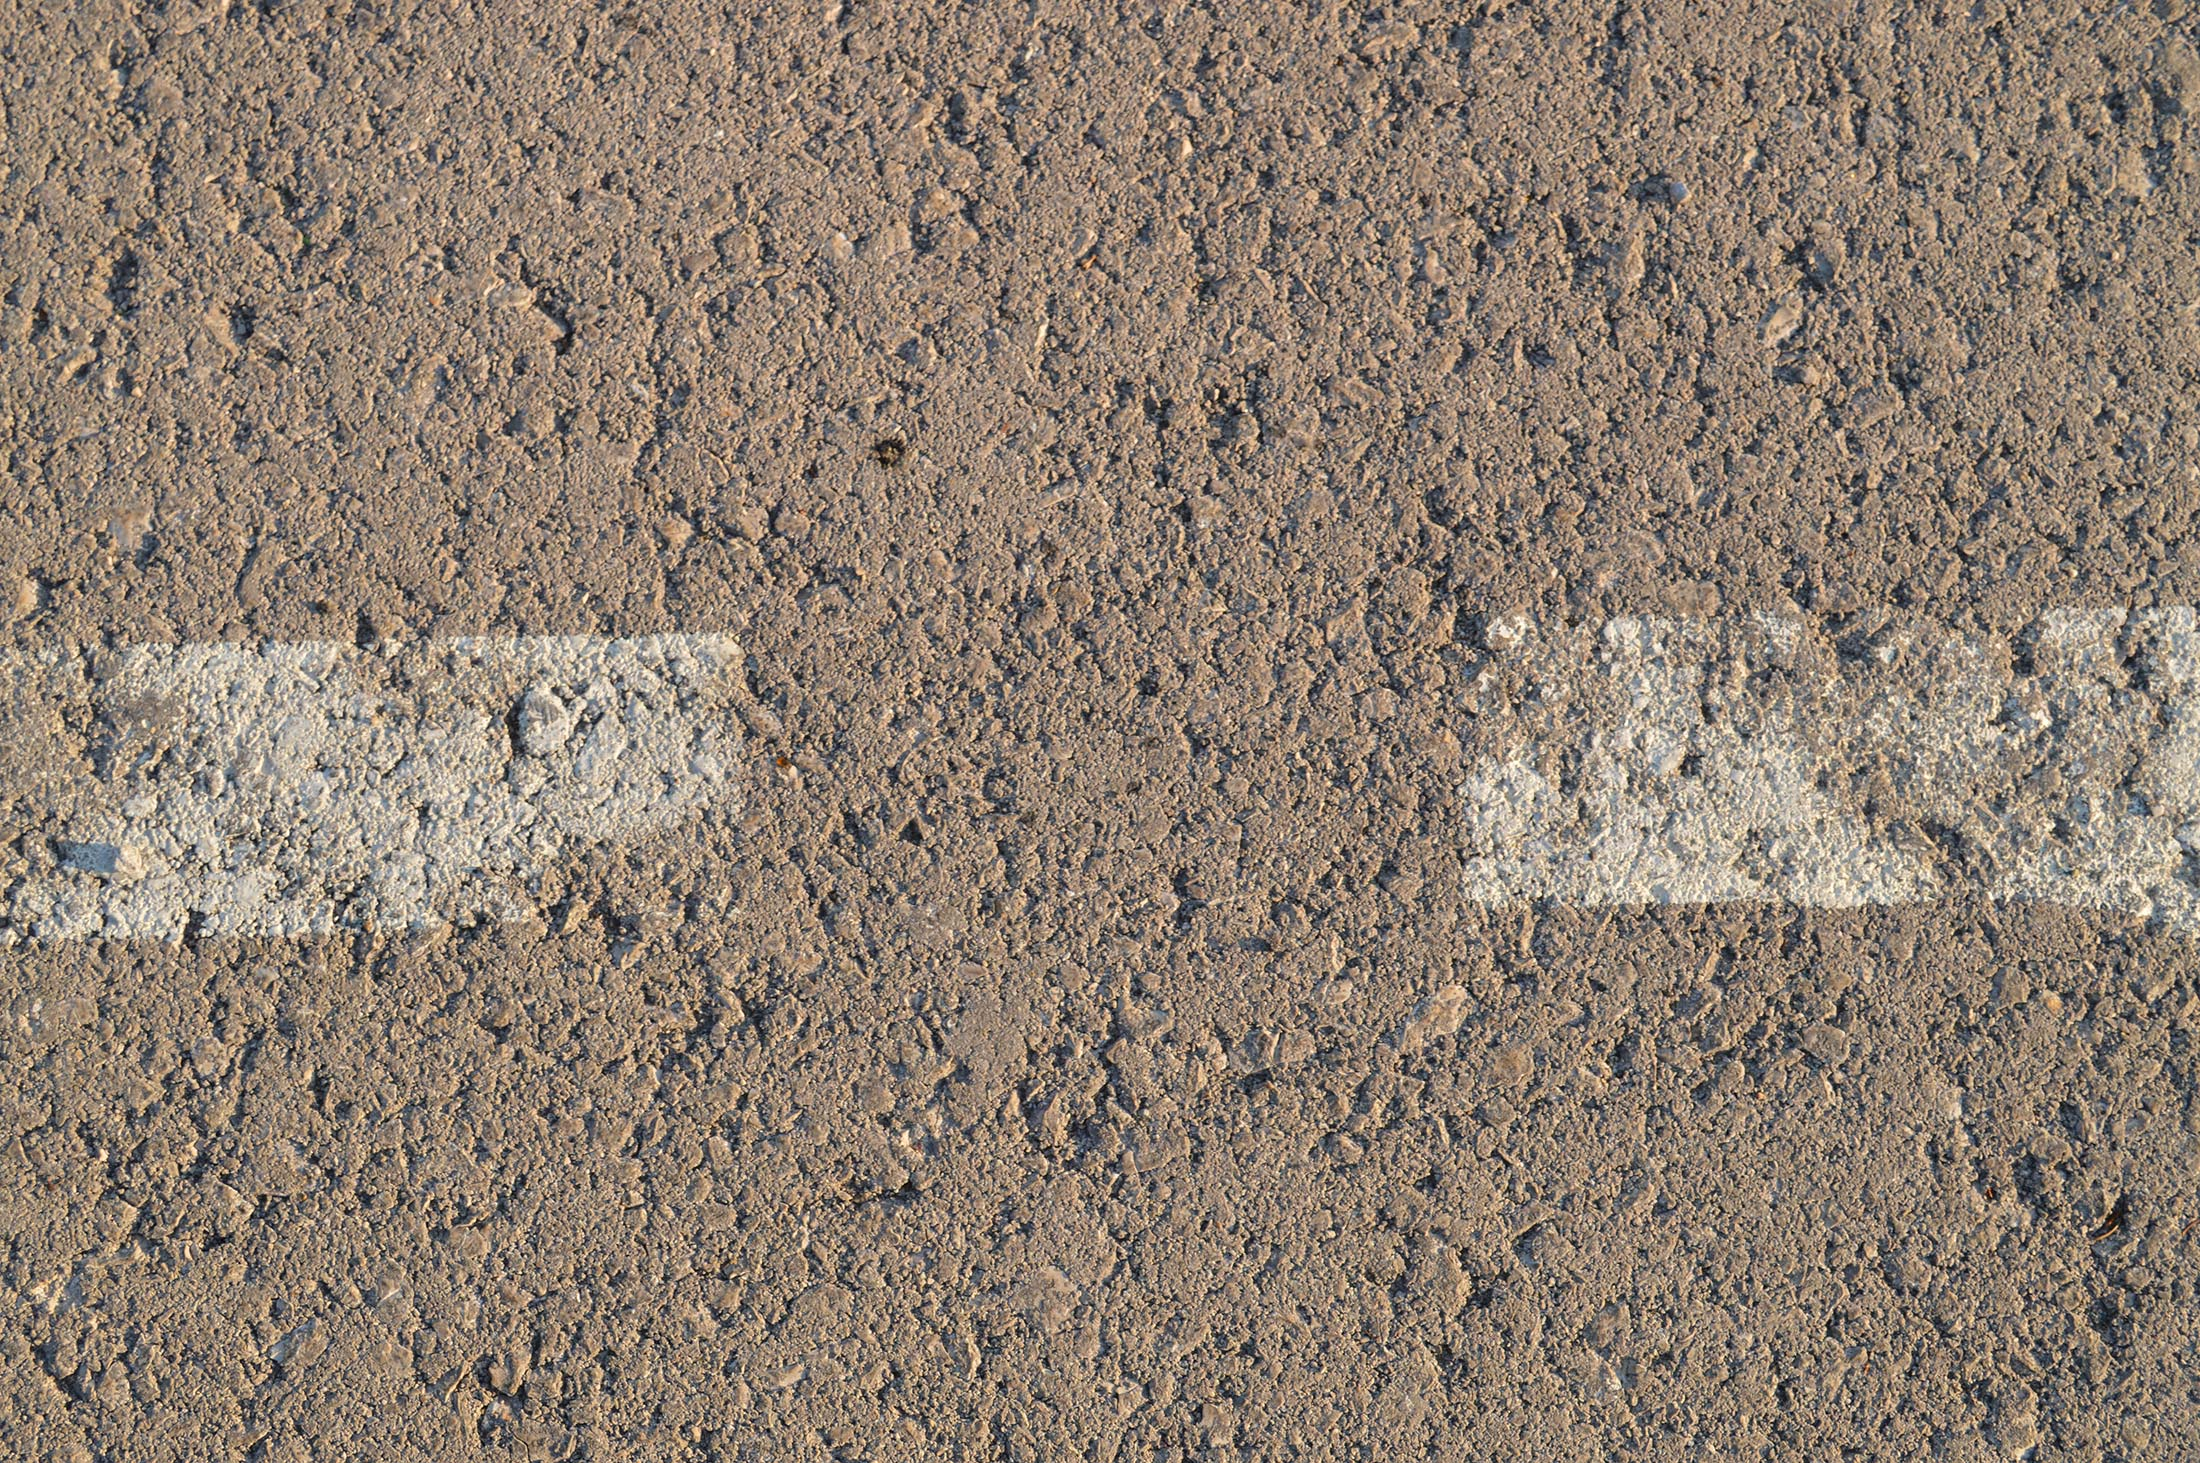 Asphalt with two white lines for 2200 x 1463 resolution